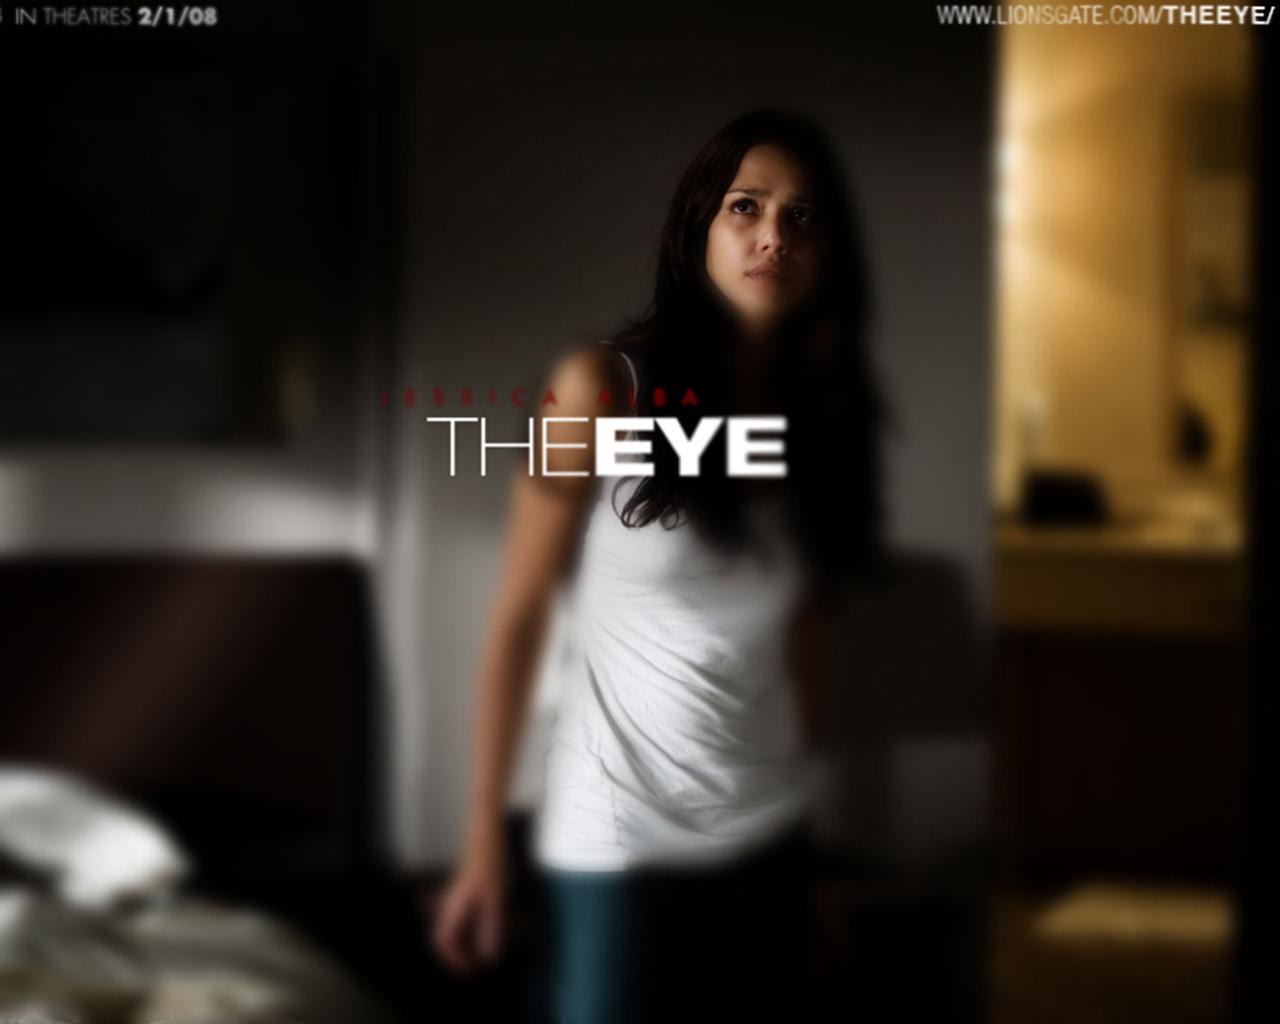 Download High quality The Eye wallpaper / Movies / 1280x1024